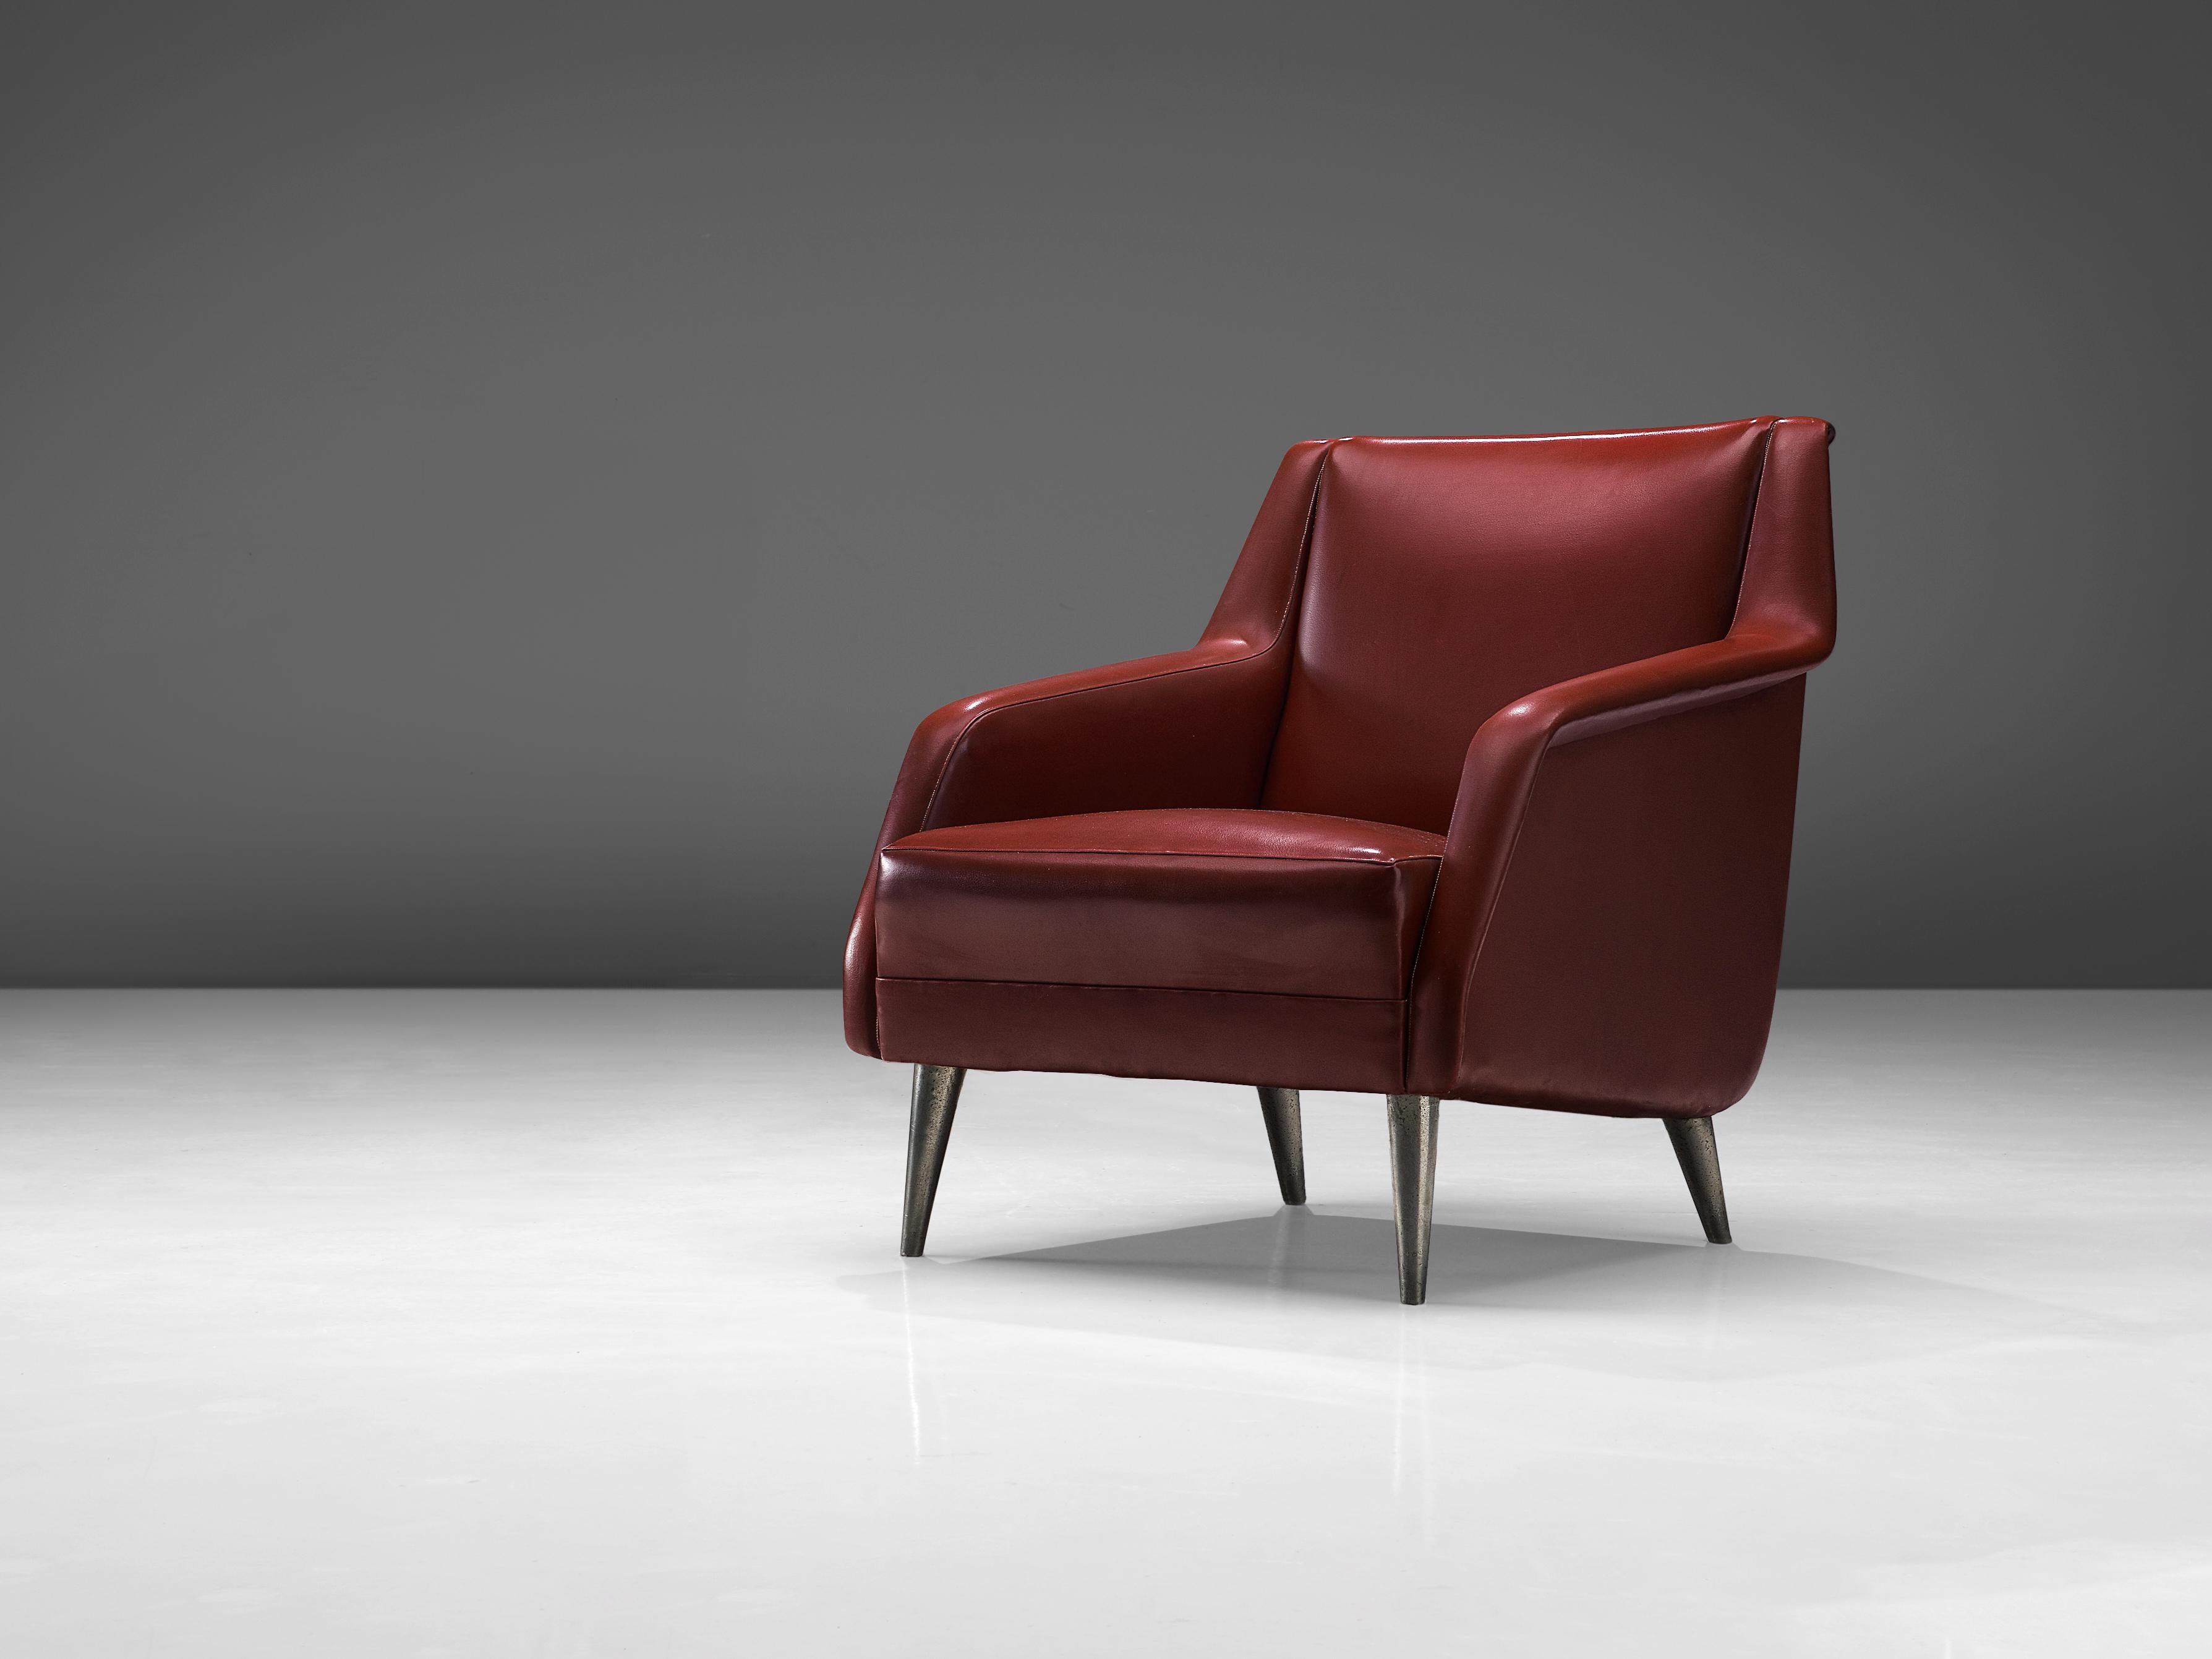 Carlo de Carli, lounge chair, model 802, red leatherette, brass, Italy, 1950s

Very elegant easy chair by Italian designer Carlo de Carli. On four round and tapered nickel-plated brass legs rests the seat. The design is characterized by the dynamic